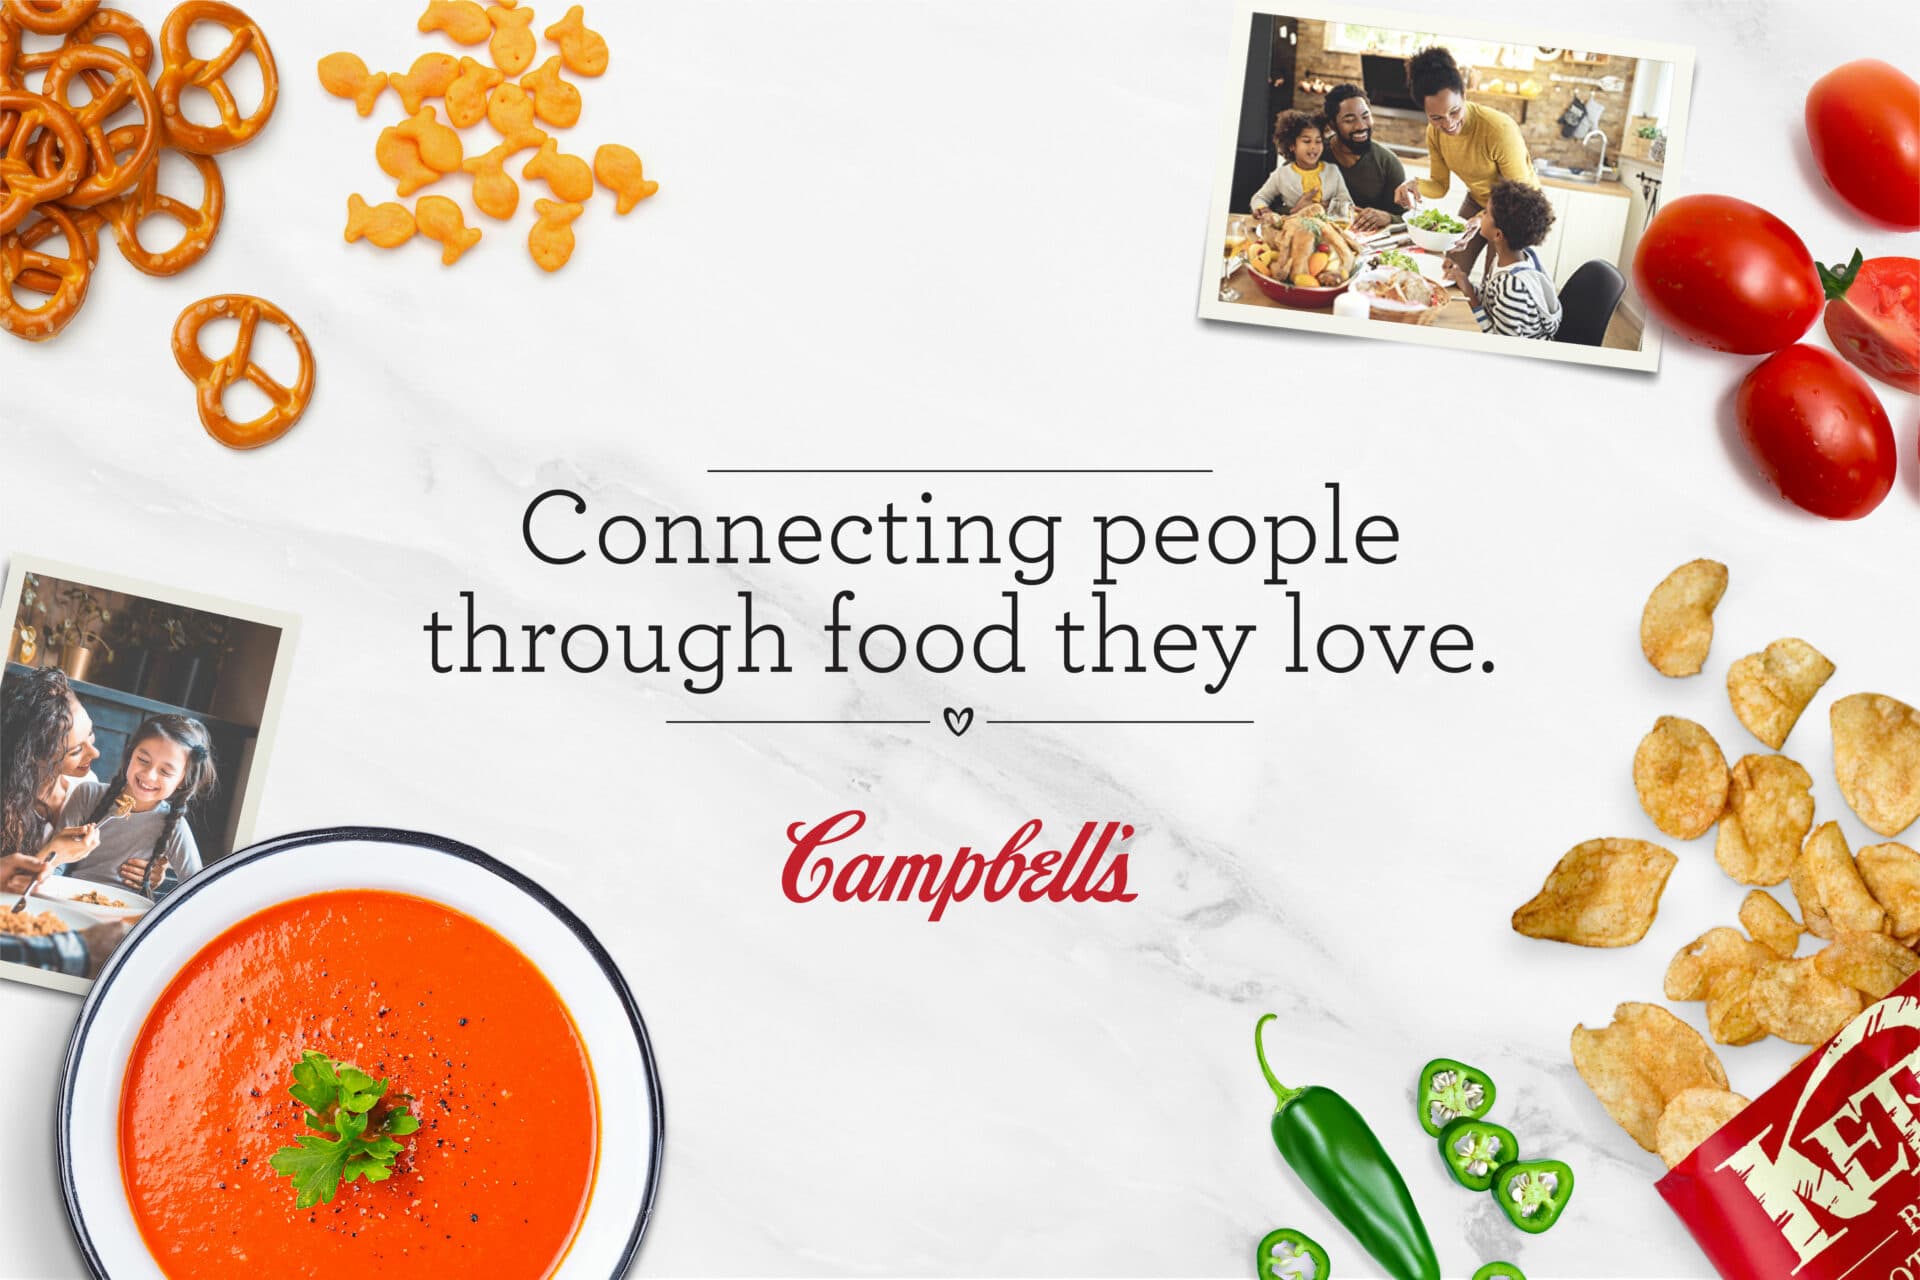 Bowl of soup on the table surrounded by peas and corn, with a photograph of a family. Text reads, "Connecting people through food they love" above the Campbell's logo